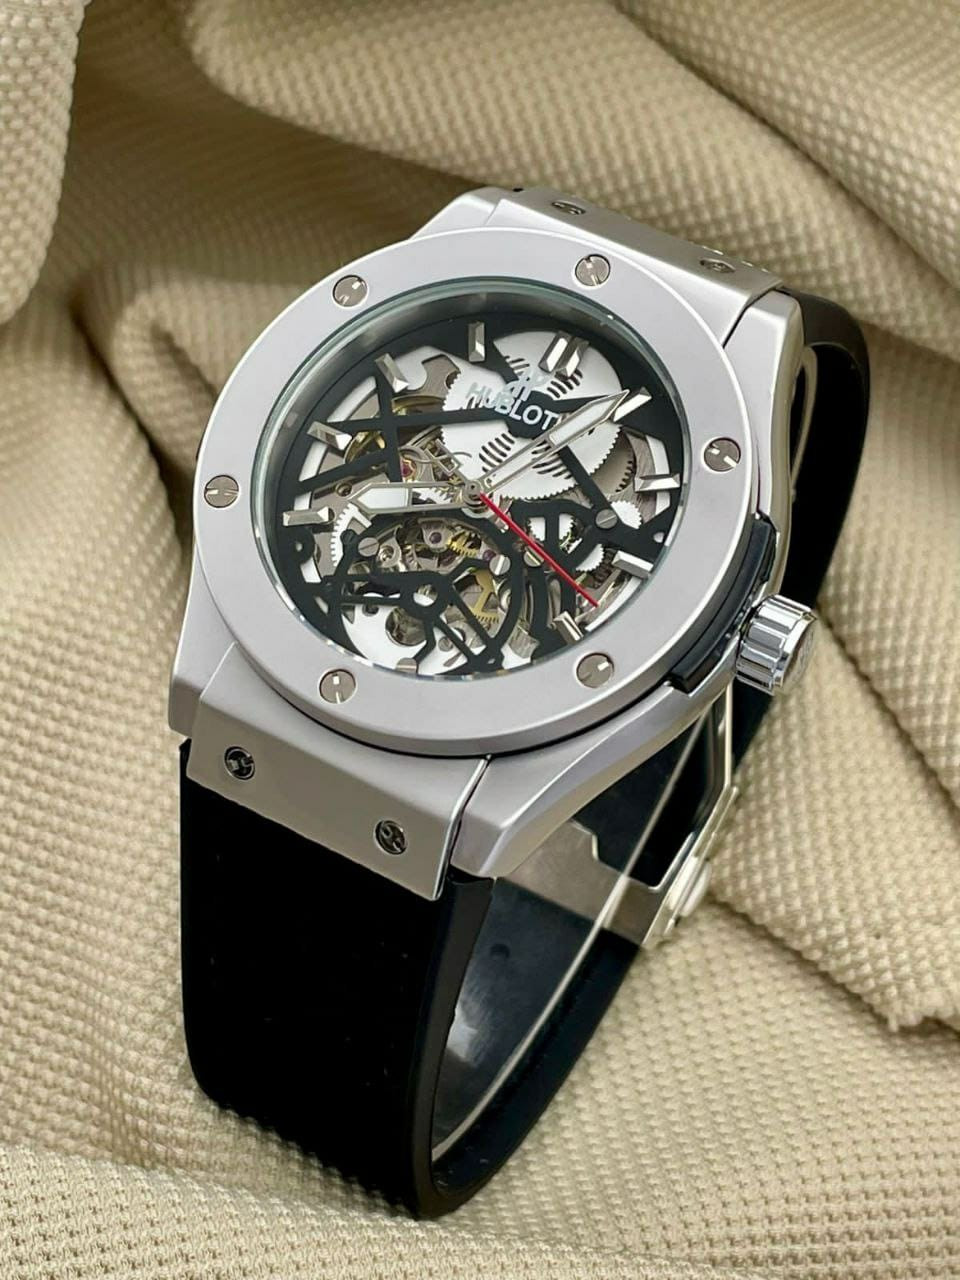 *LIMITED EDITION *HUBLOT * BIG BAND ** For HIM* 7AAA * MASTER HIGH END QUALITY* Original model* Features* Automatic-Glareproofed sapphire crystal Glass, lethar belt -Quartz Movement *ROYAL LOOK